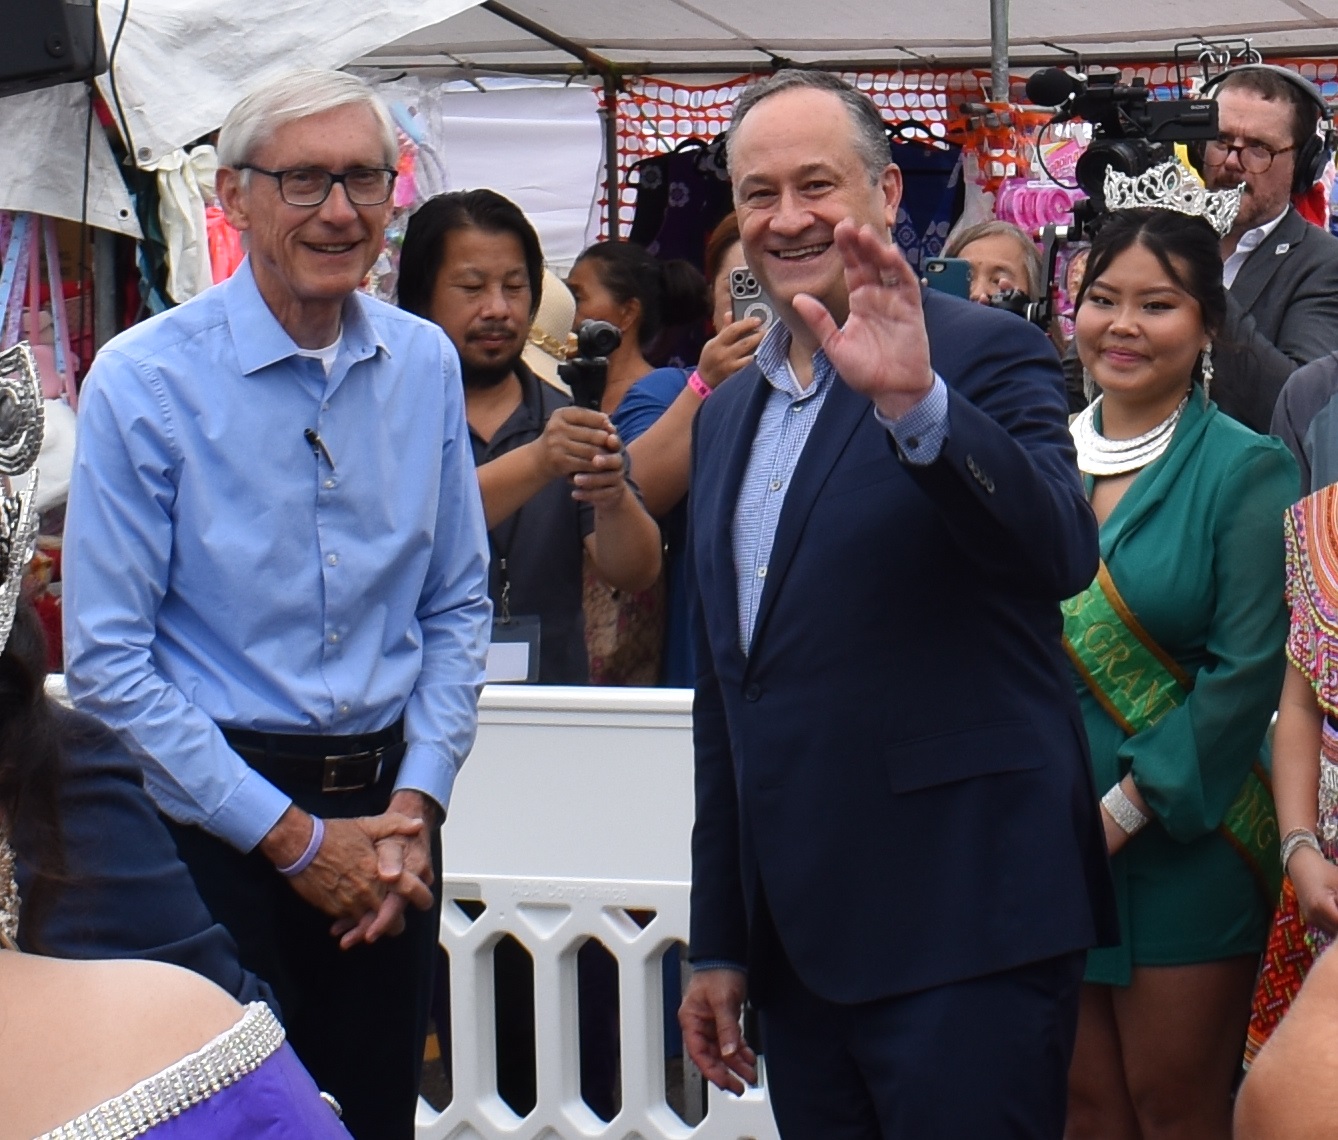 At Hmong Wausau Festival, second gentleman Doug Emhoff says Hmong vote could decide election